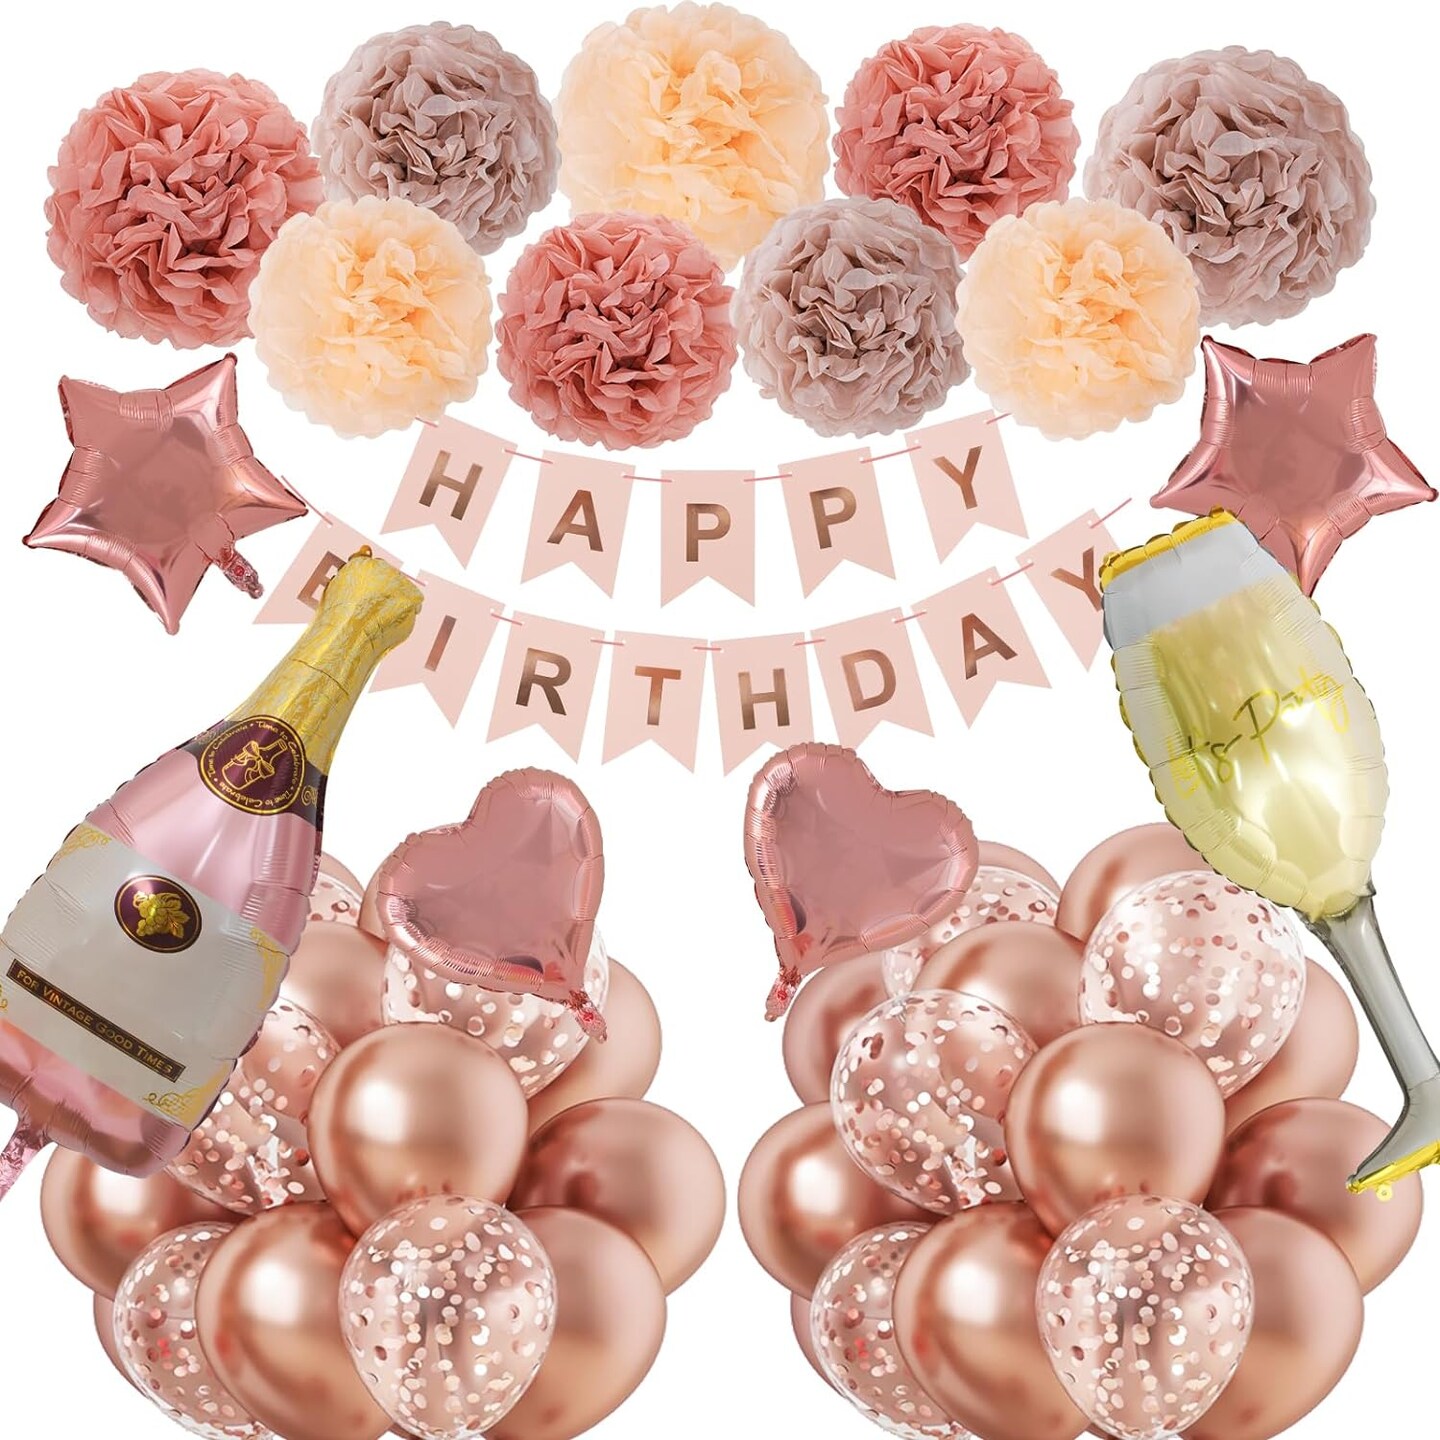 Rose Gold Birthday Decorations for Women and Girls, Rose Gold Party Decorations Set,Happy Birthday Banner, Metallic Rose Gold Confetti Balloons, Foil Balloons